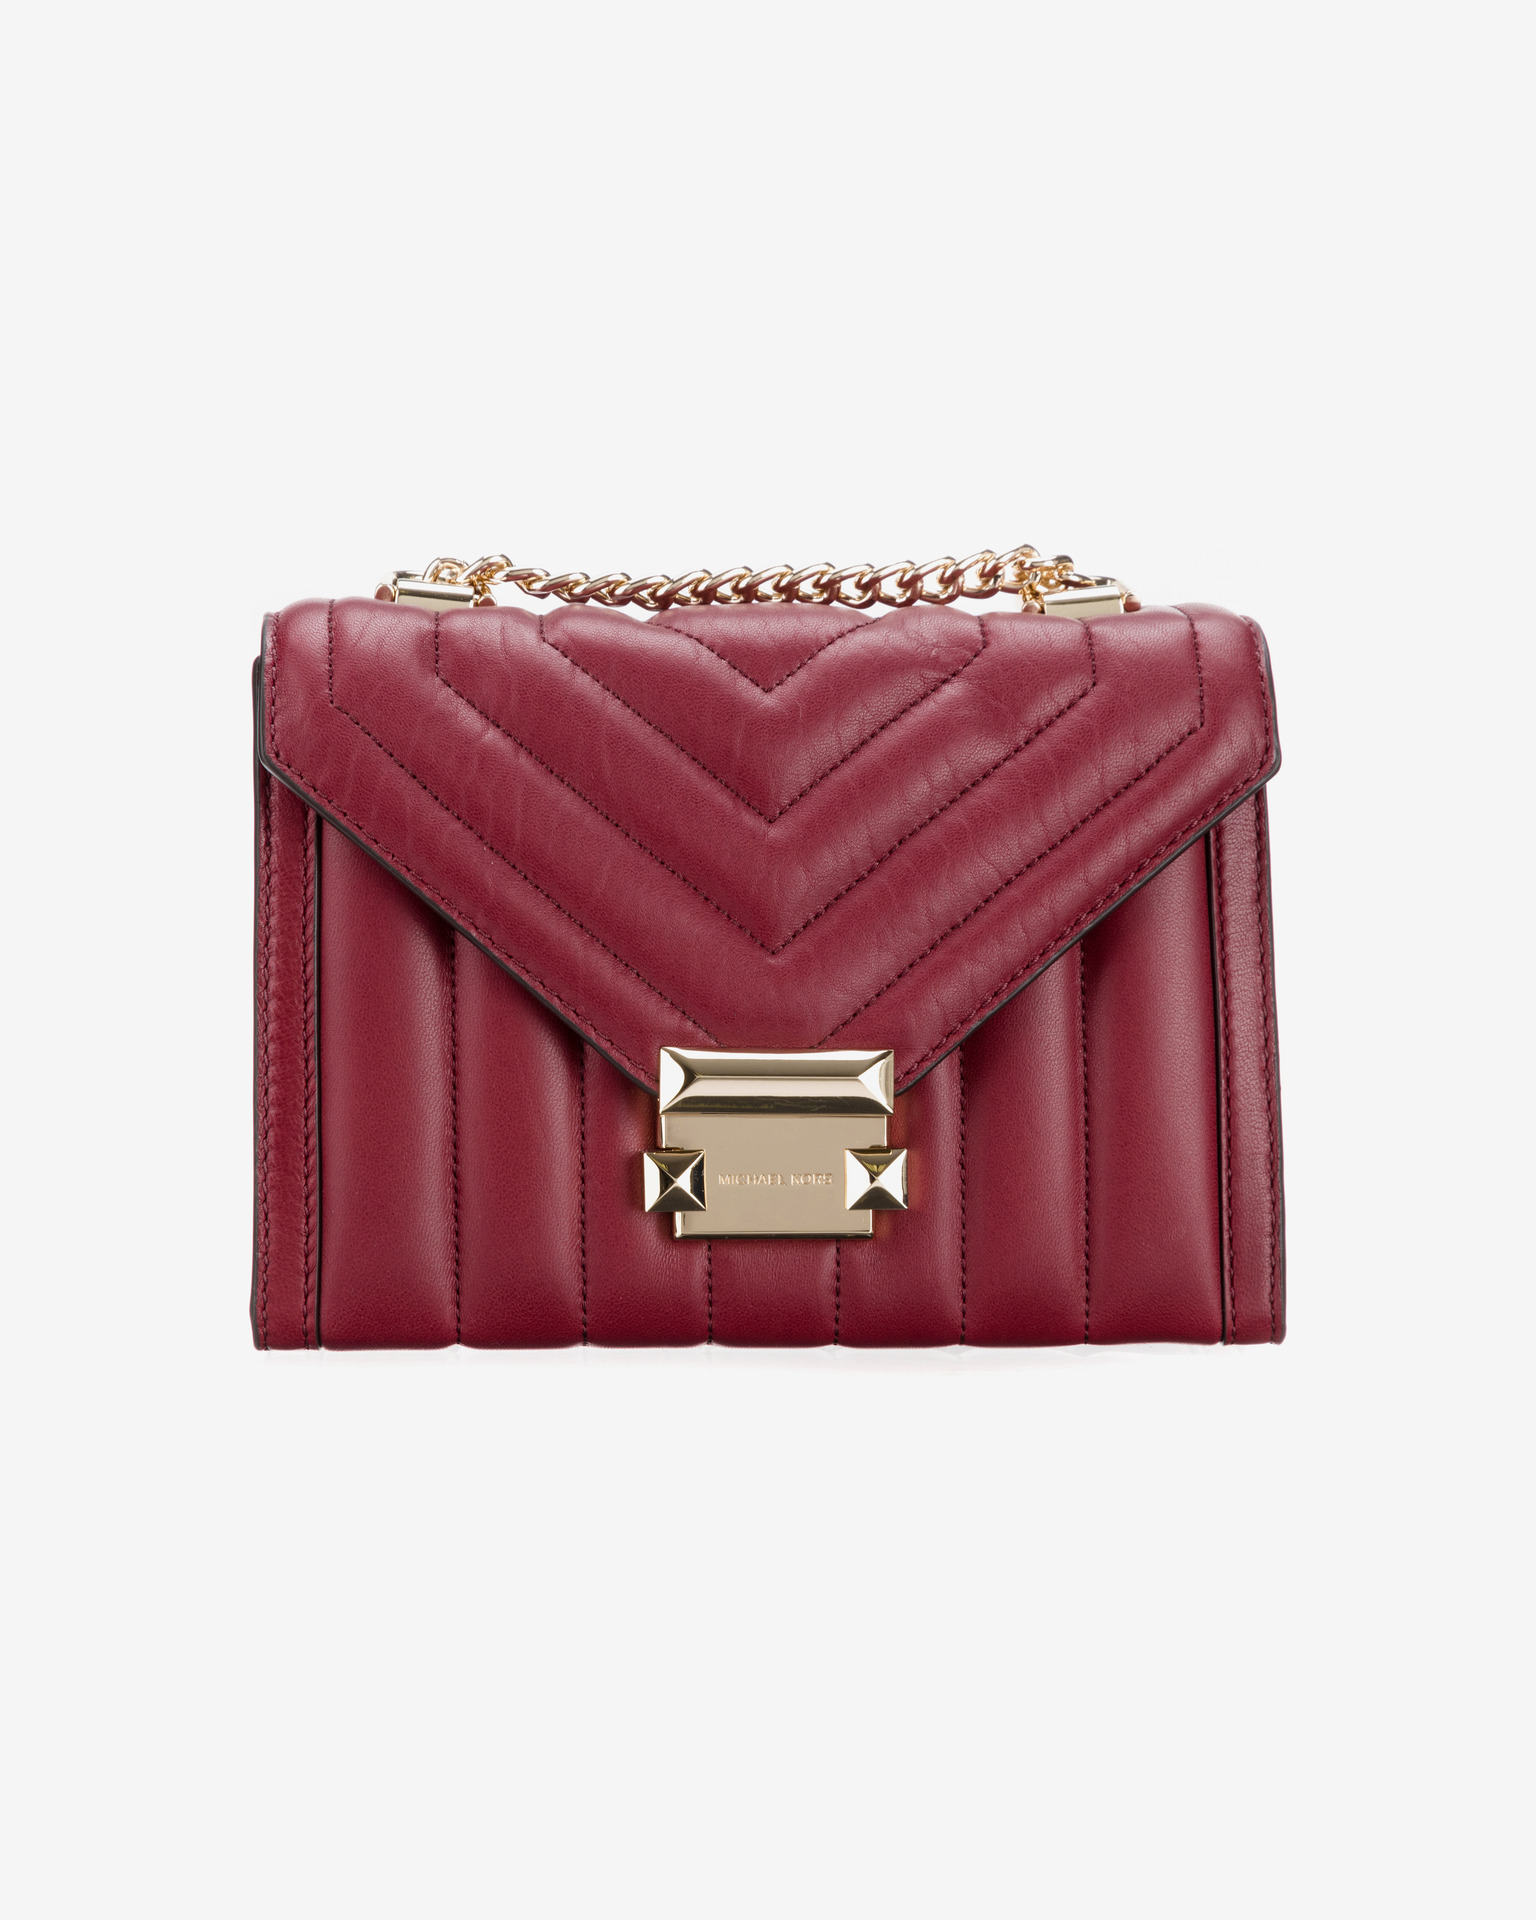 Michael Kors Bright Red Small Whitney Shoulder Bag at FORZIERI